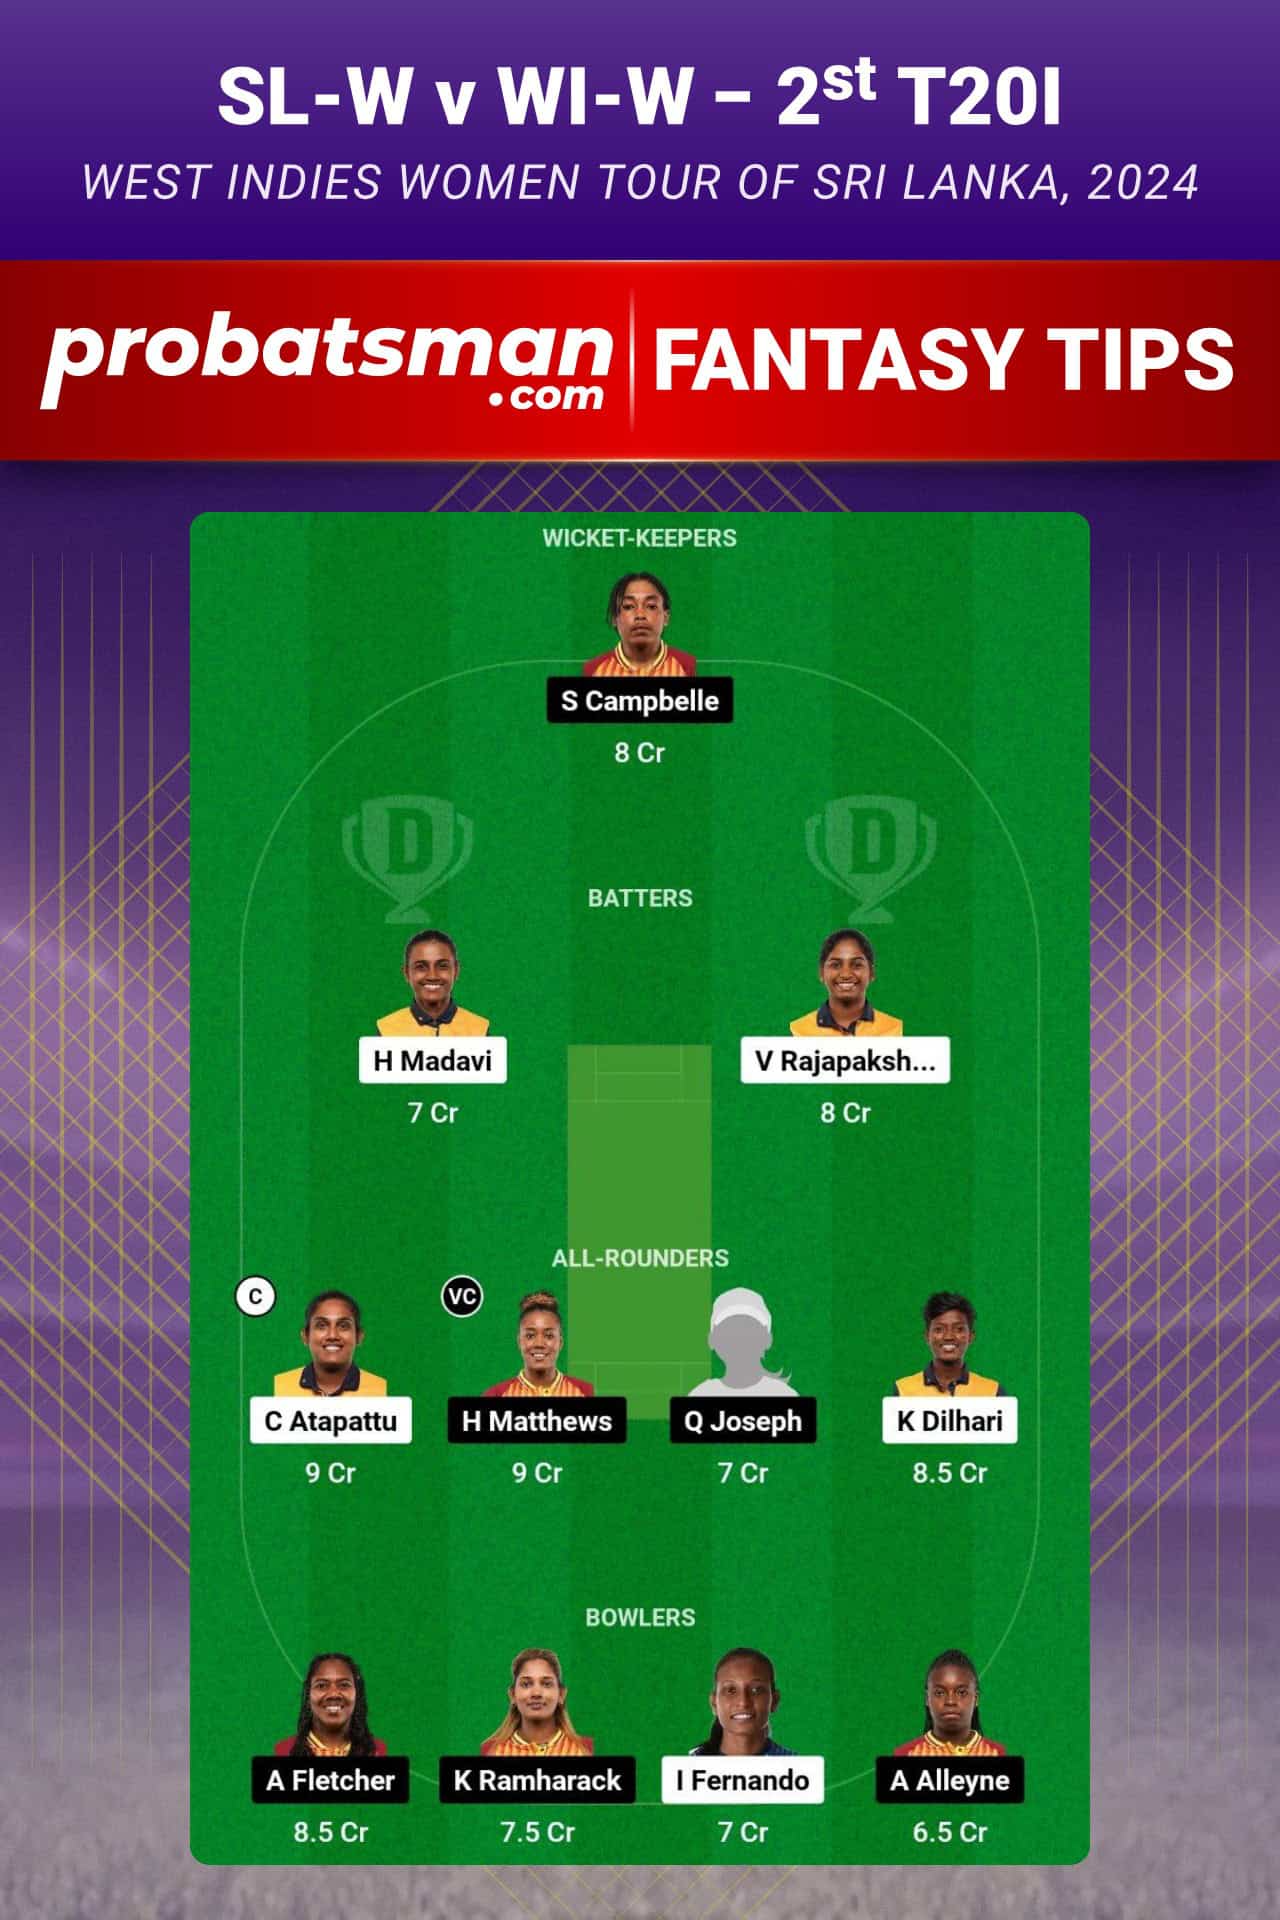 SL-W vs WI-W Dream11 Prediction For 2nd T20I of West Indies Women tour of Sri Lanka 2024